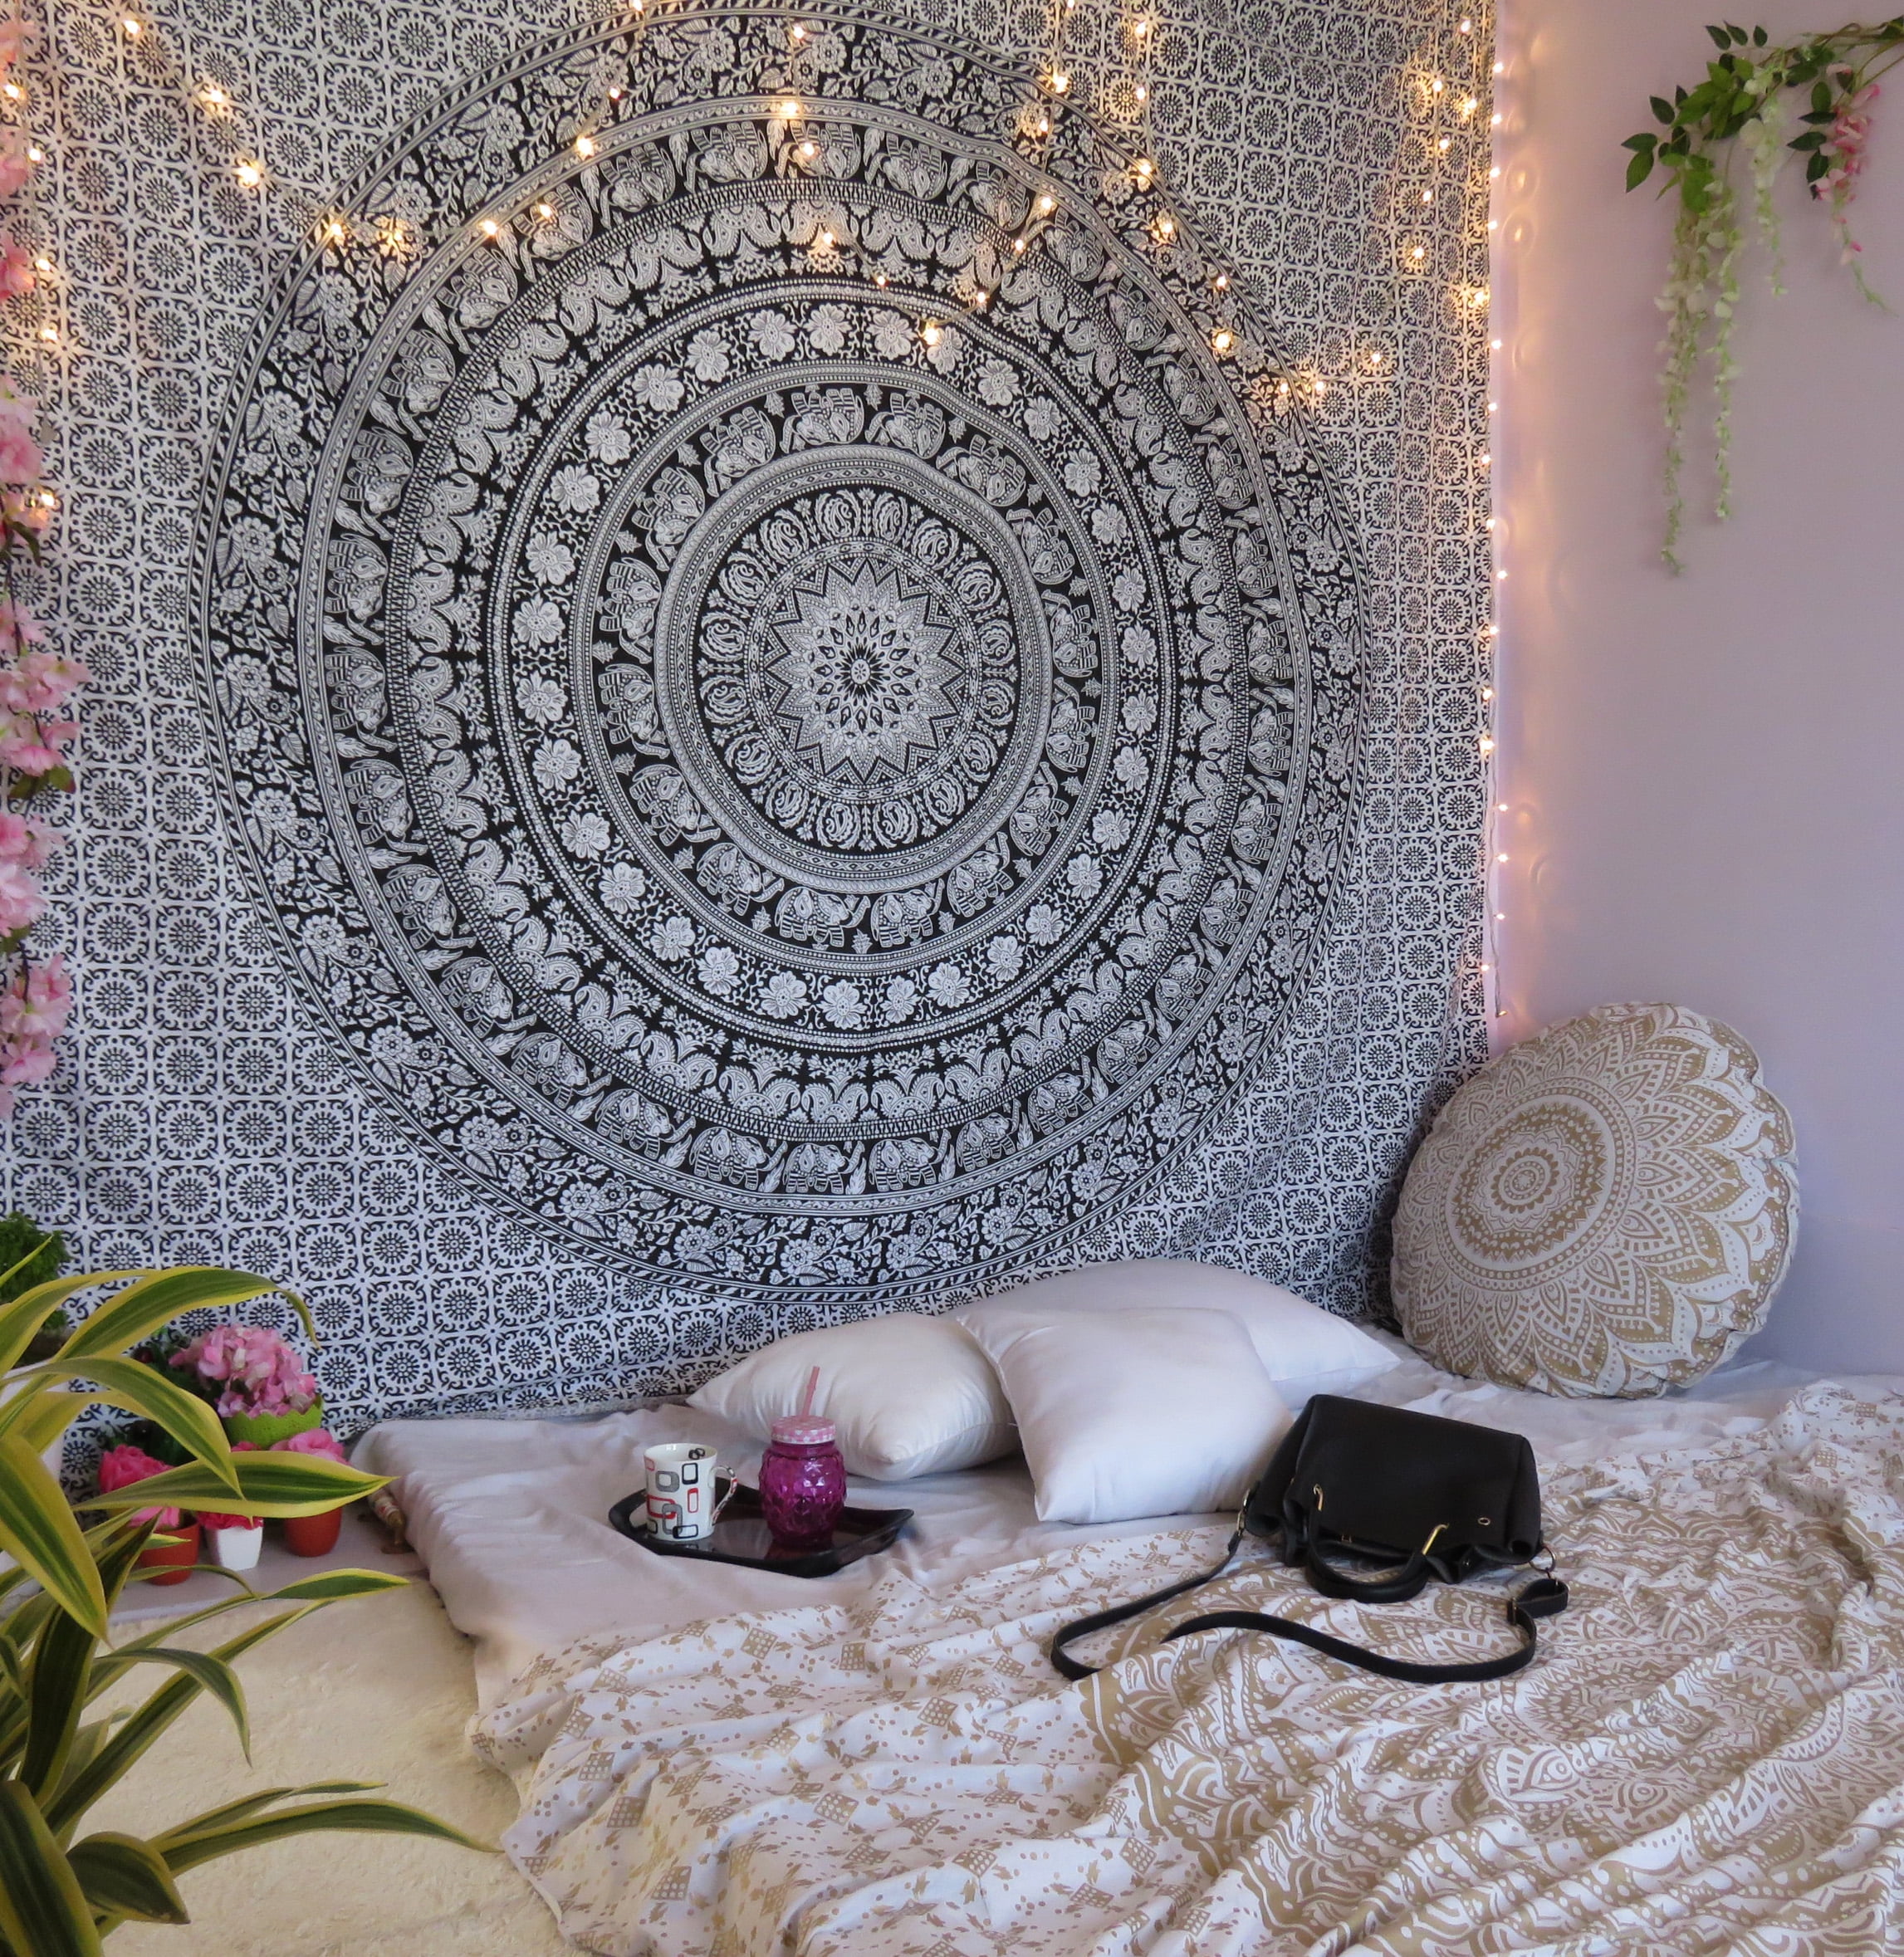 Indian Boho Mandala Tapestry Hippie Wall Hanging Queen Bedspread Home Decors 